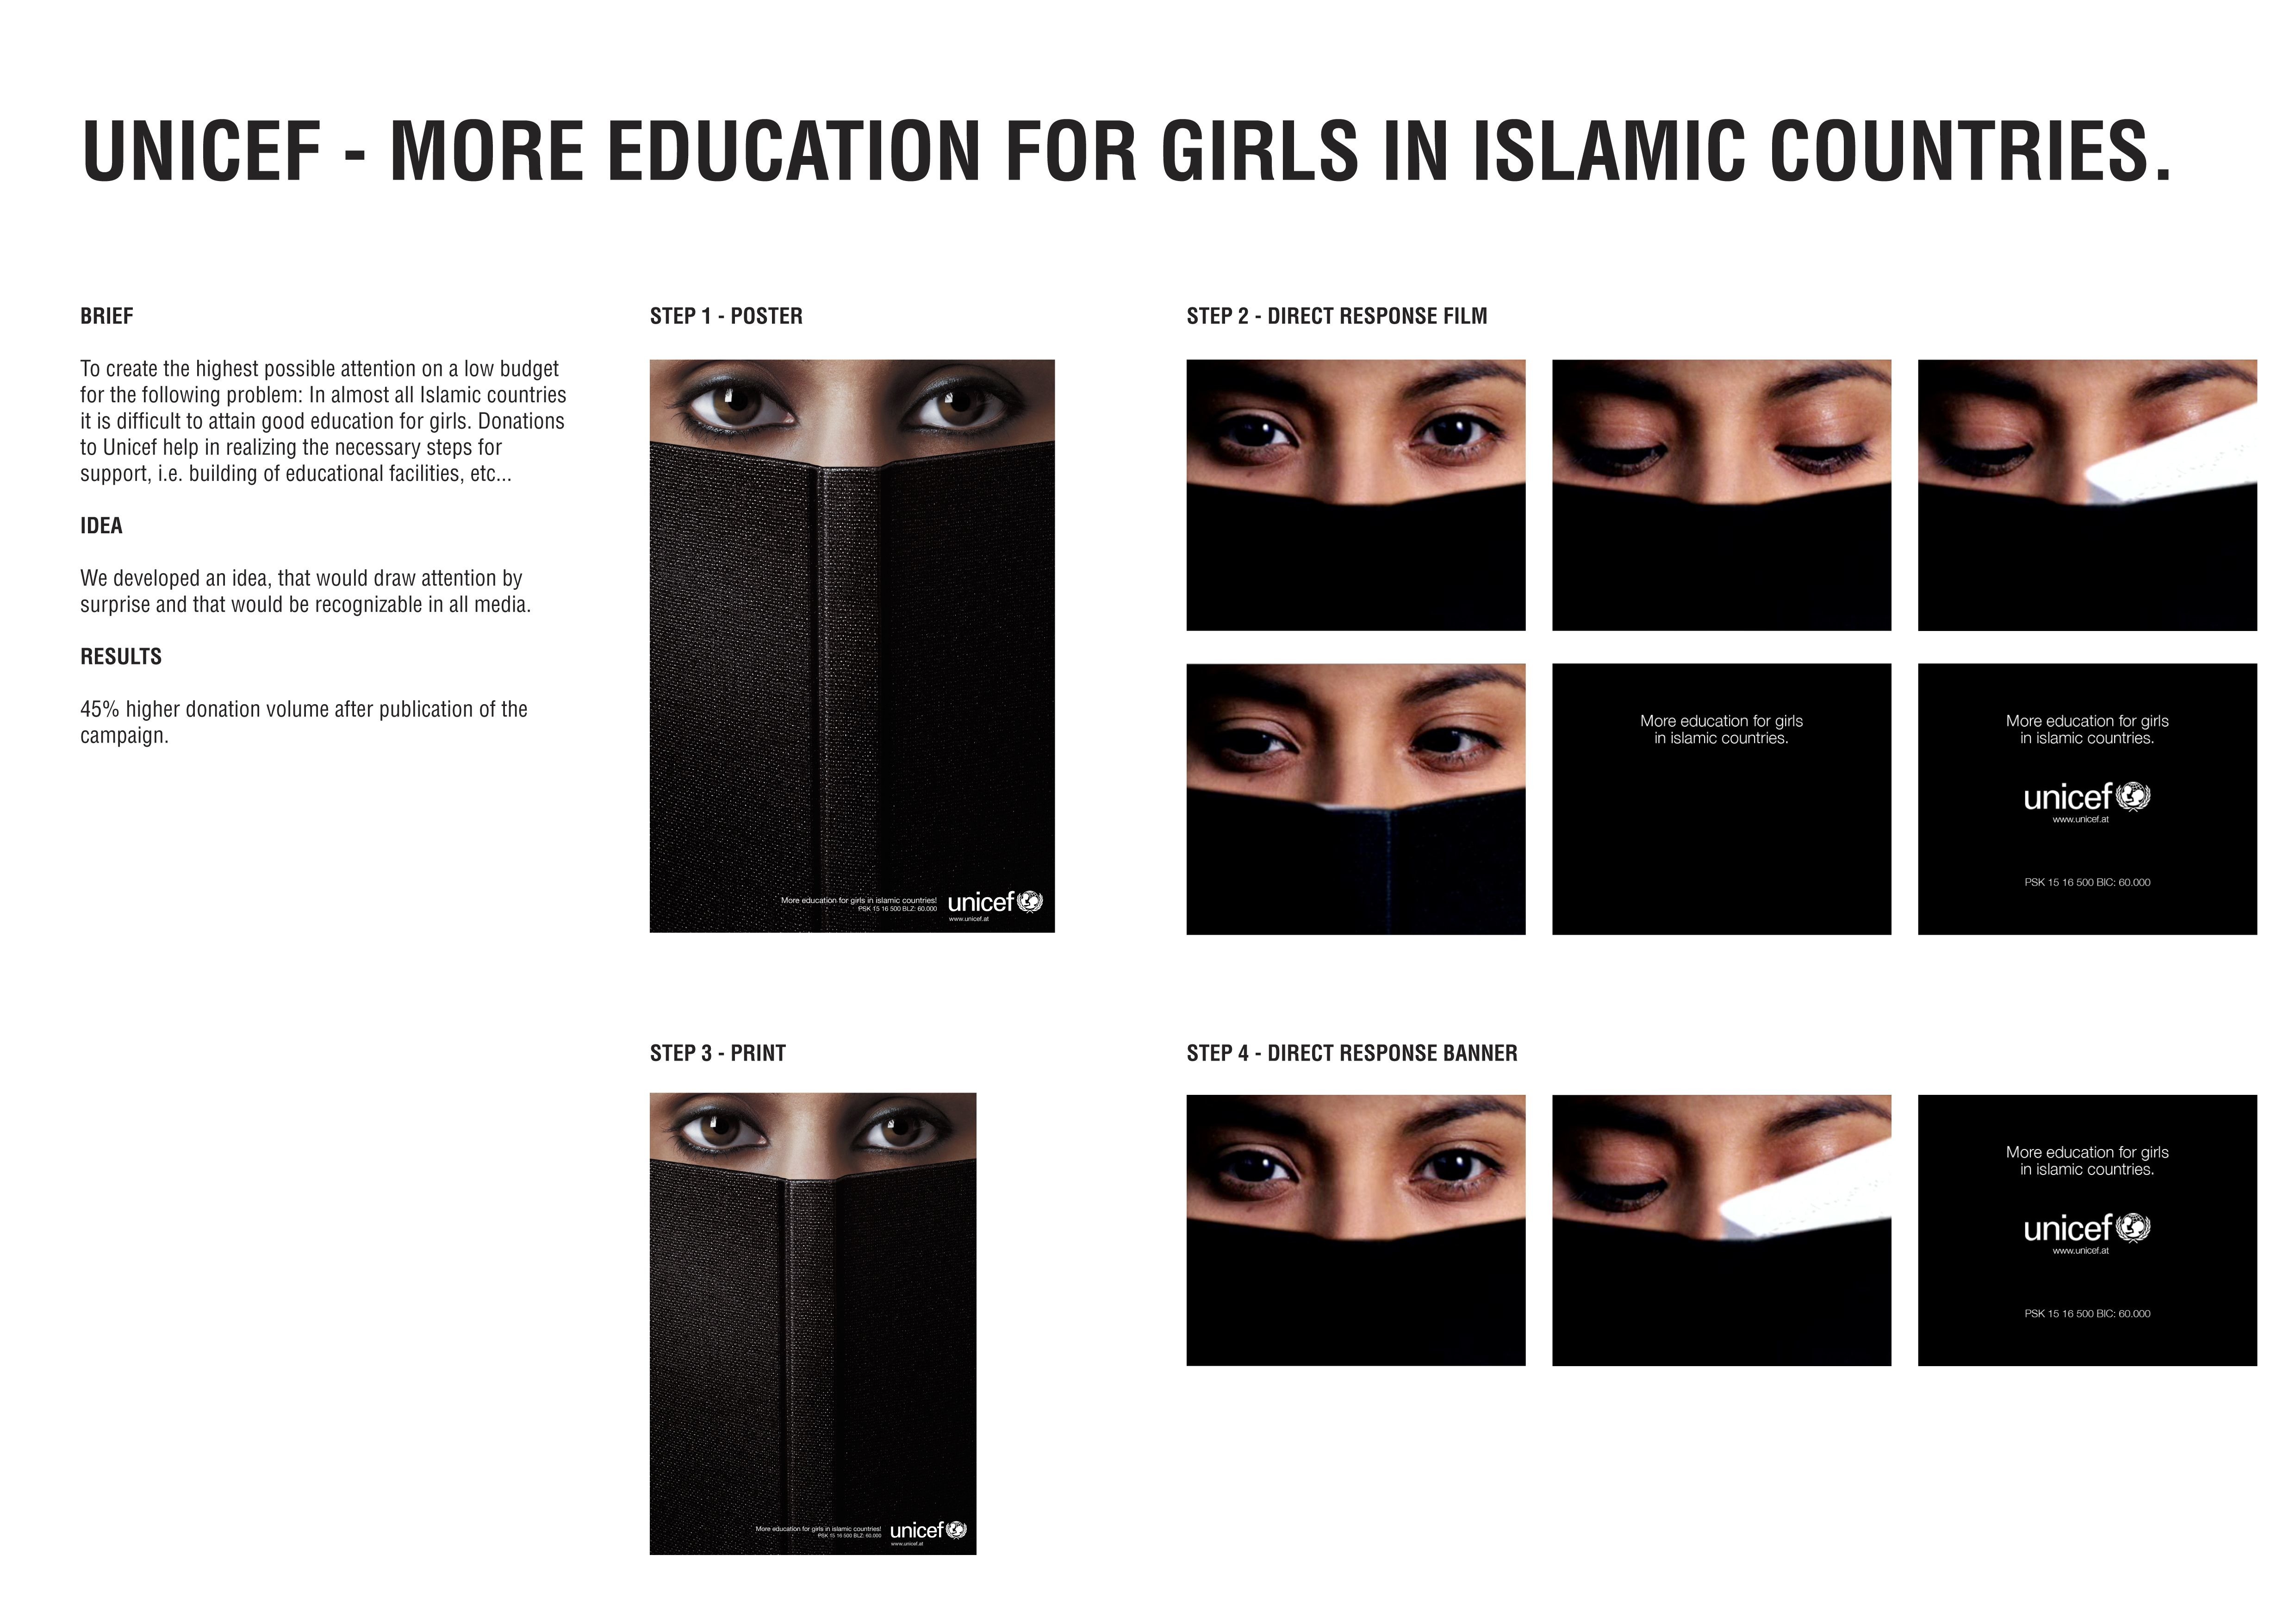 GENDER EQUALITY IN ISLAMIC EDUCATION